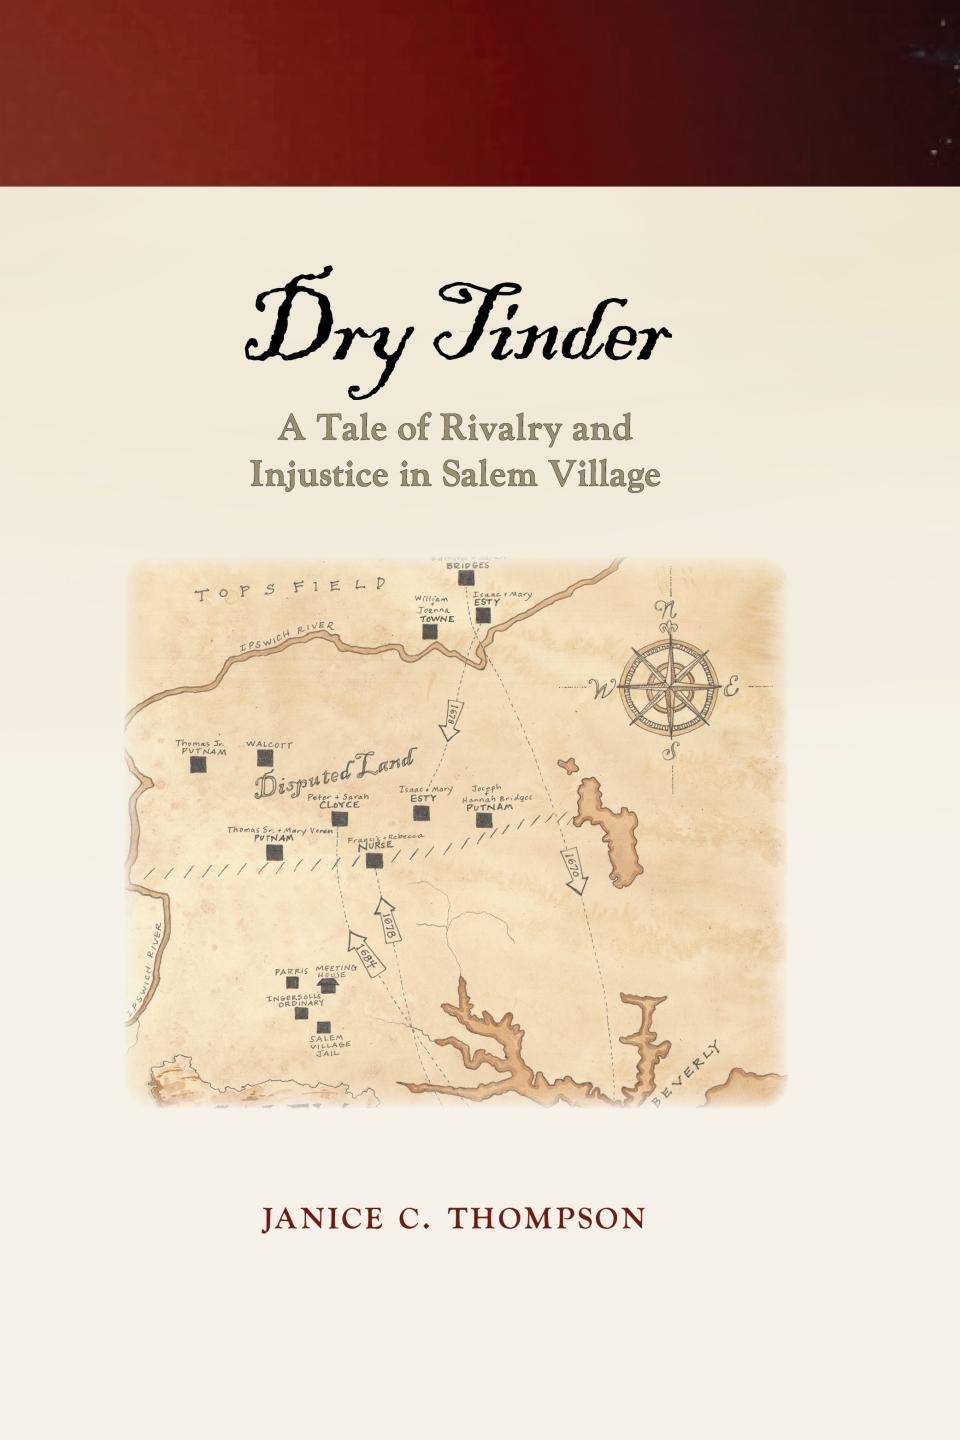 "Dry Tinder: A Tale of Rivalry and Injustice in Salem Village" is written by former Ashland resident Janice Thompson. The historical fiction novel tells the story of Sarah Towne, who later became Sarah Clayes and fled from Salem to Framingham during the Salem witch trials.